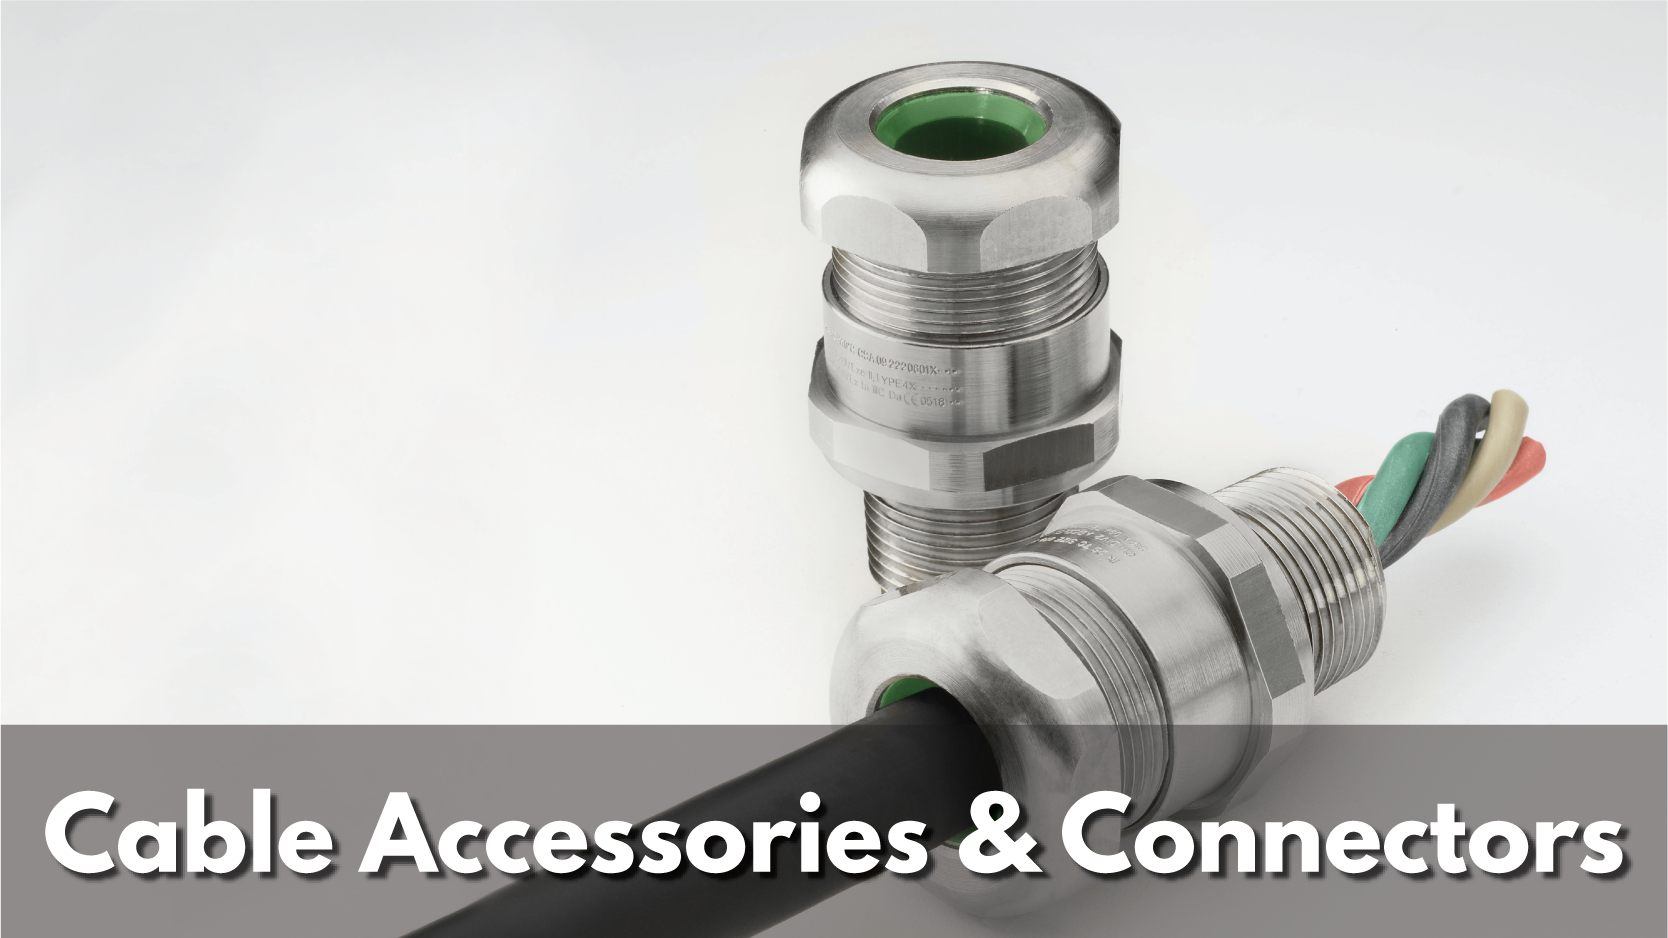 Texcan - View All Products - Cable Accessories & Connectors